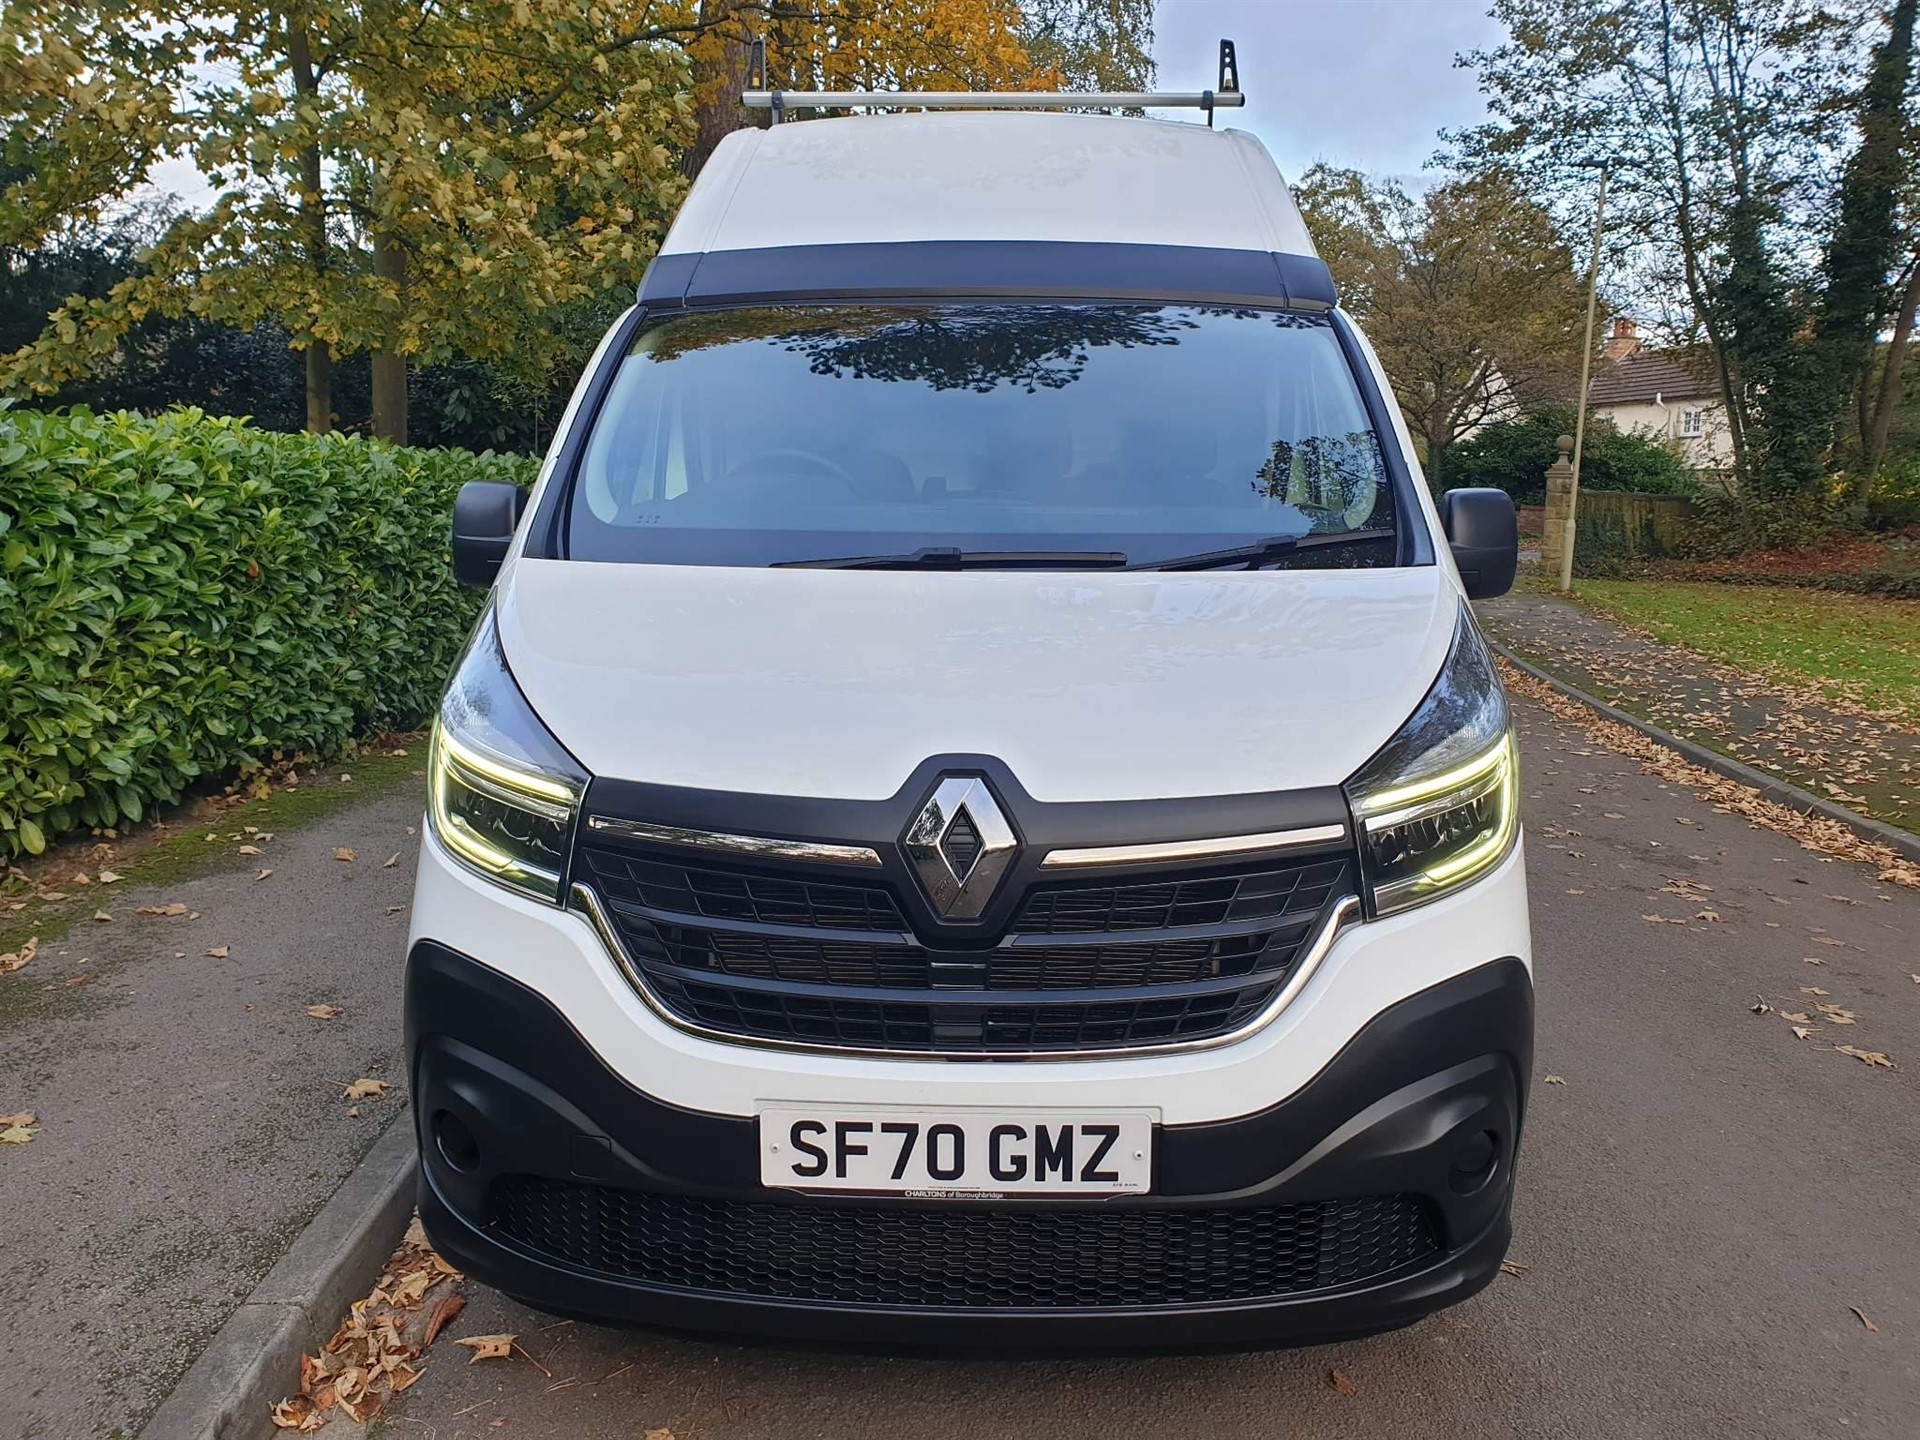 Updated Renault Trafic goes on sale in the UK priced from £25k